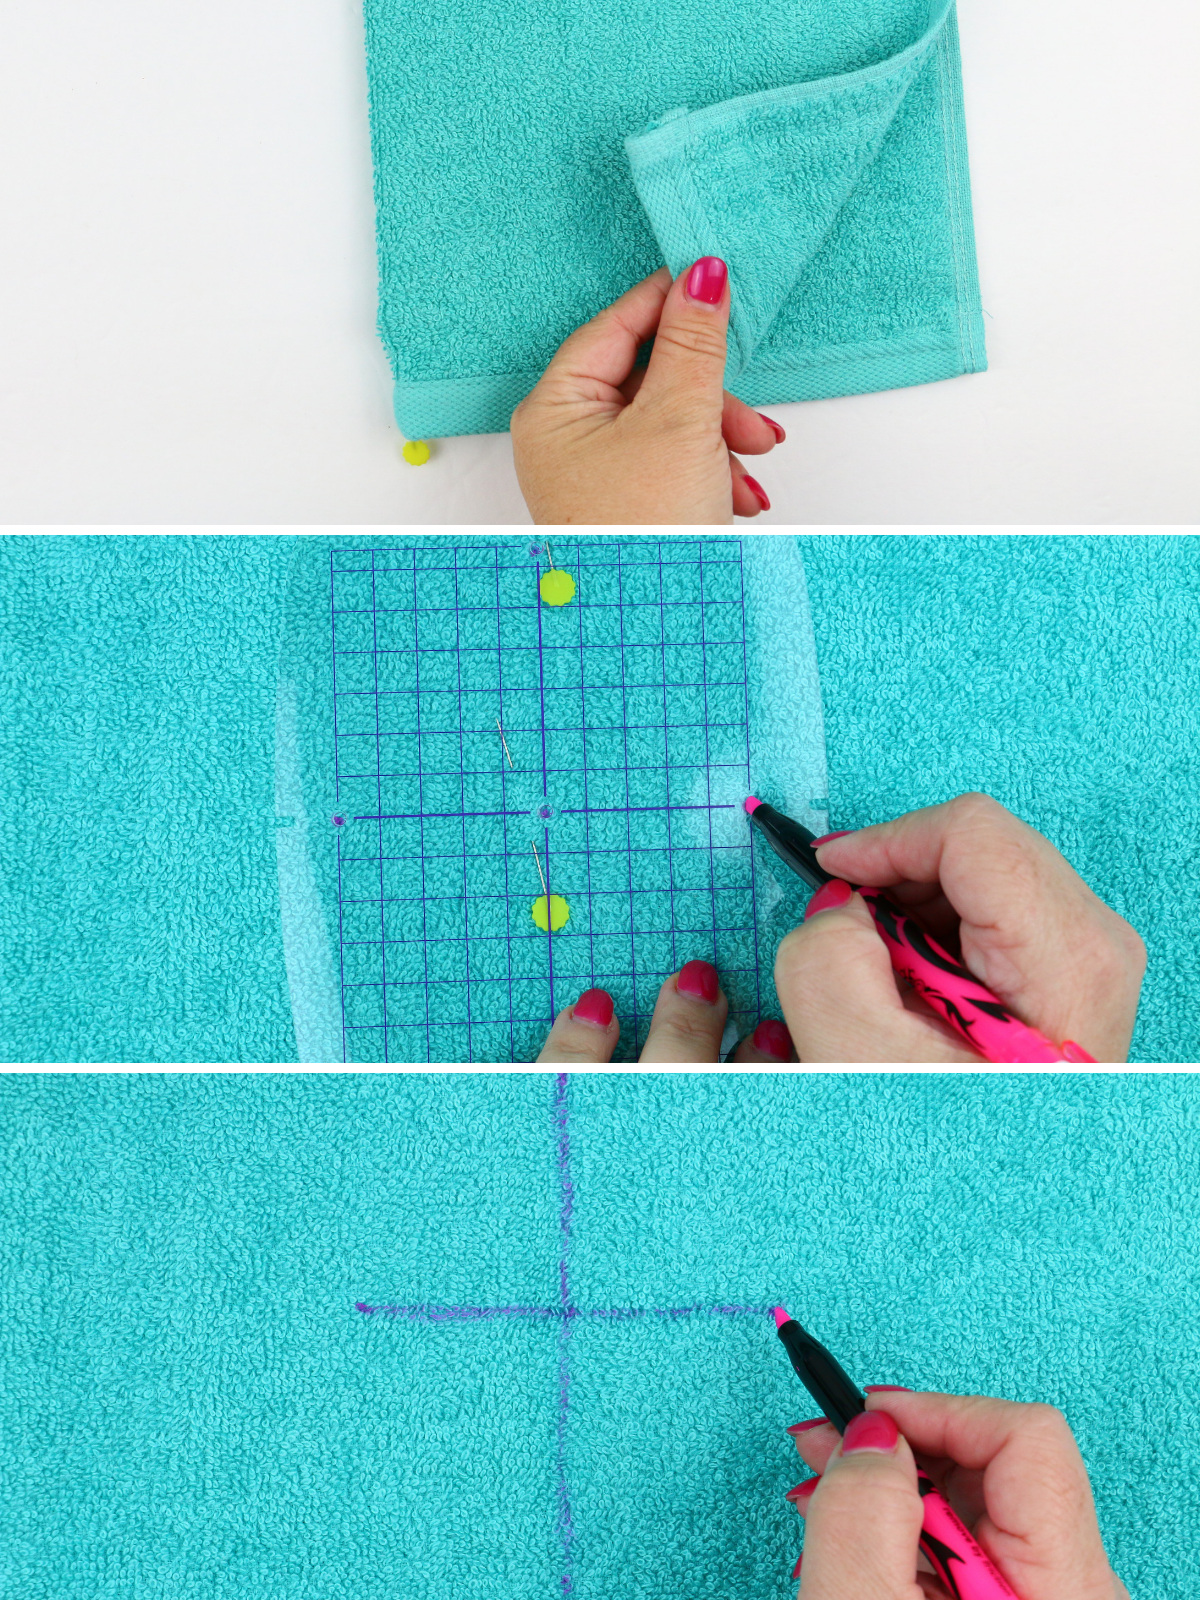 Embroidery Stabilizers Made Easy